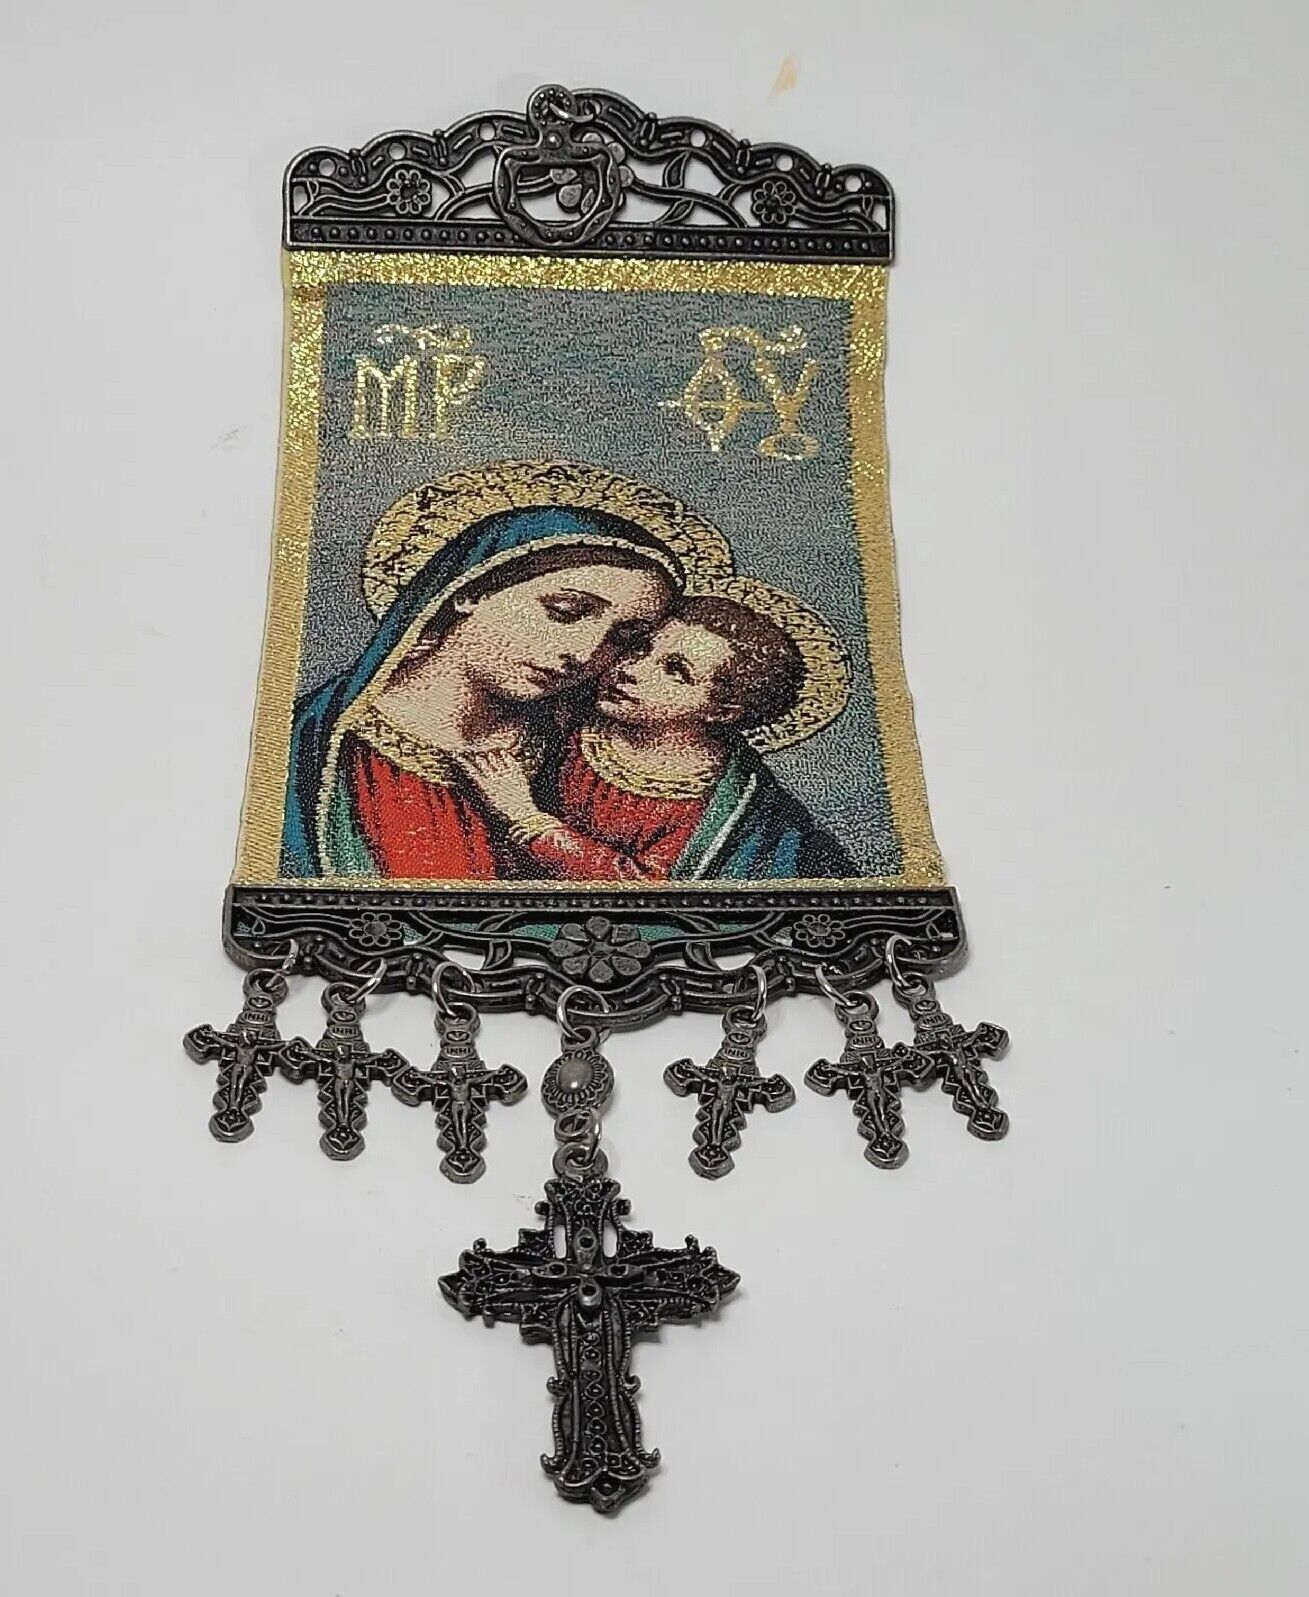 Madonna & Child Fabric Religious Banner/Wall Decor Metal Crosses Byzantine Look 